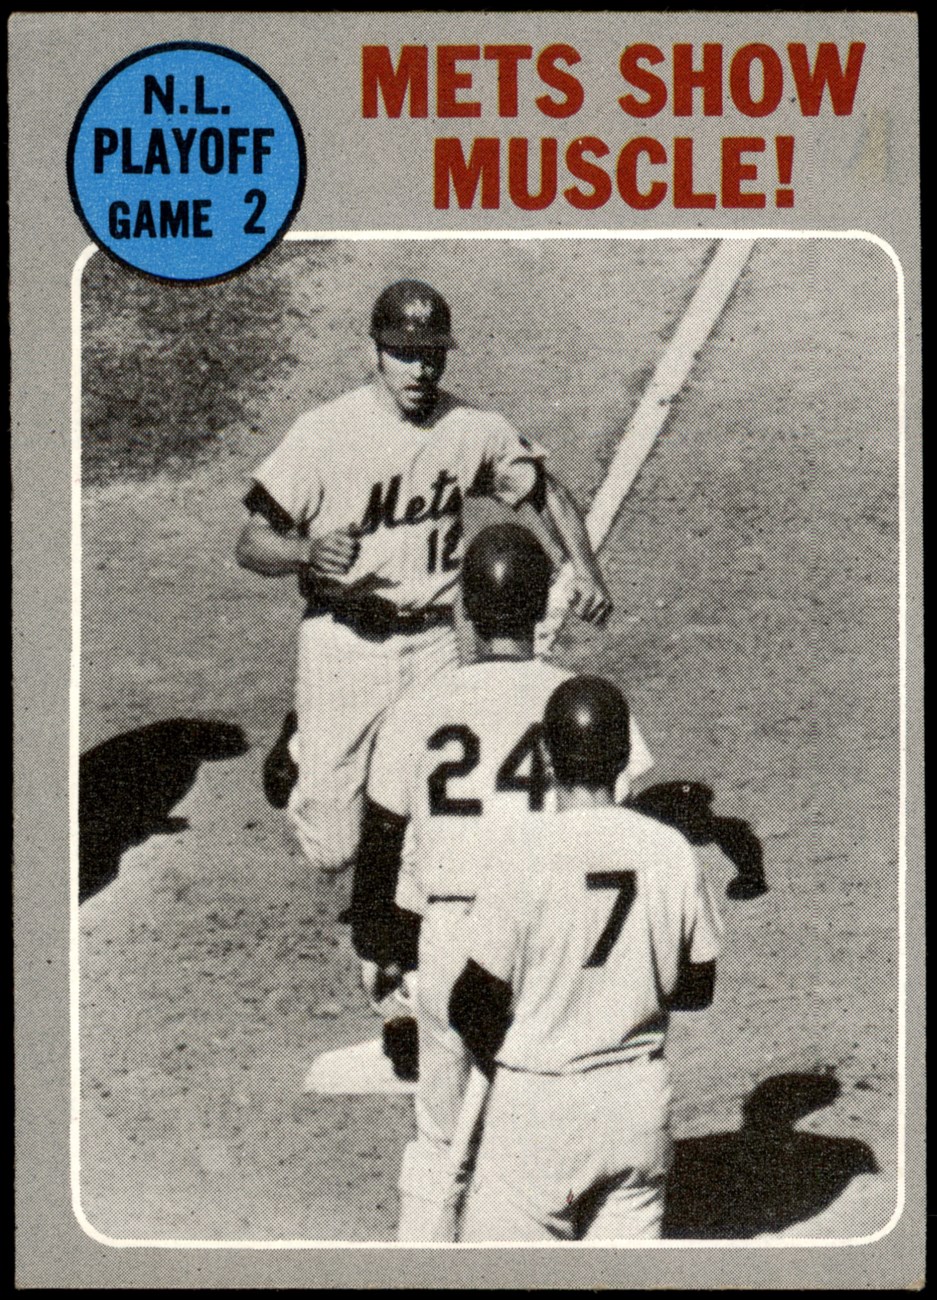 1970 Topps #196 - Ken Boswell / Art Shamsky / Ed Kranpool 1969 NL Playoff -  Game 2 - Mets Show Muscle 4 - VG/EX